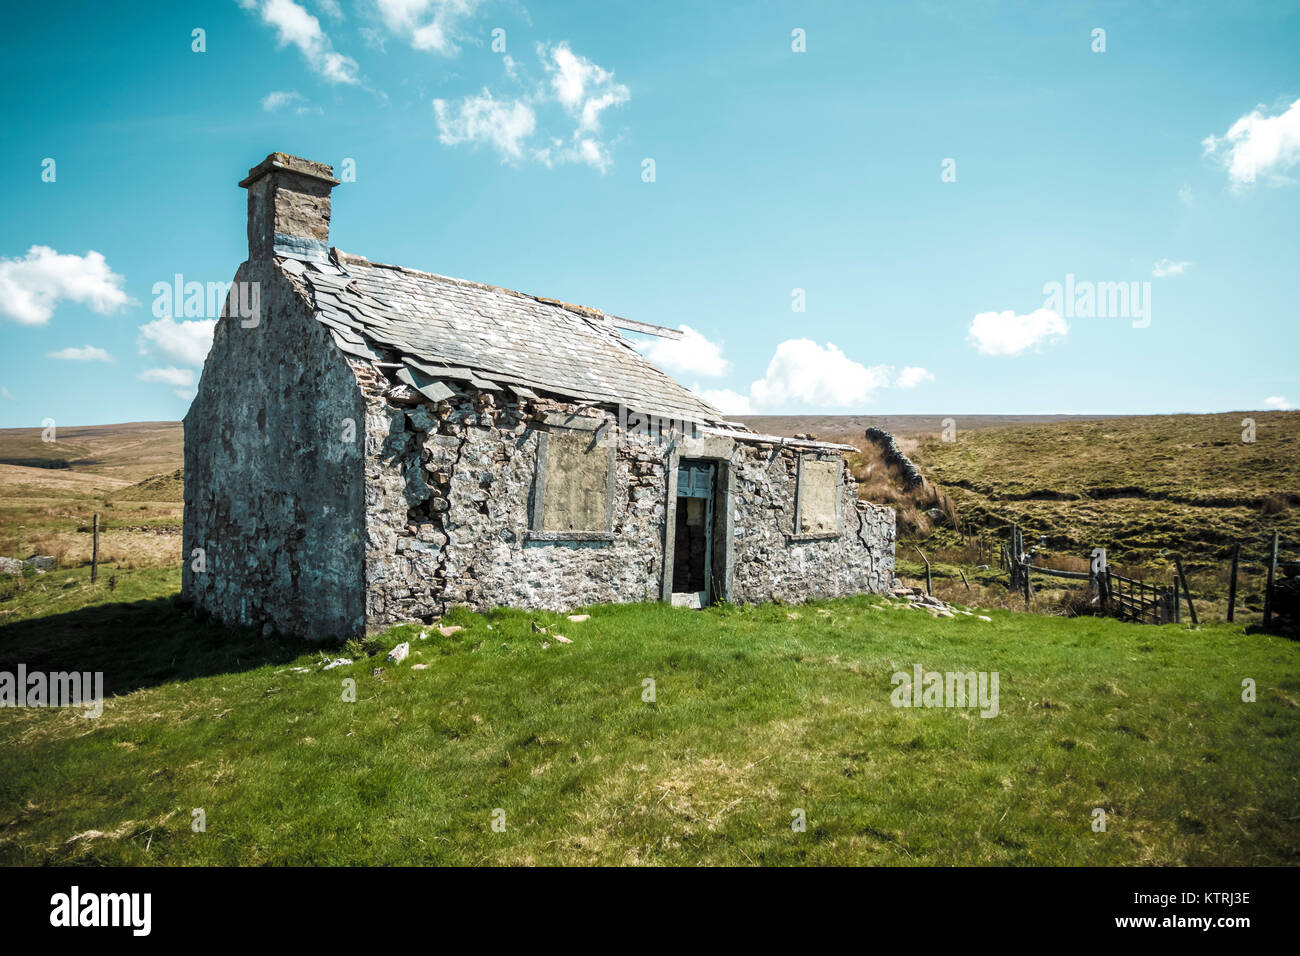 Derelict And Abandoned Old Stone Cottage In Yorkshire Dales Stock